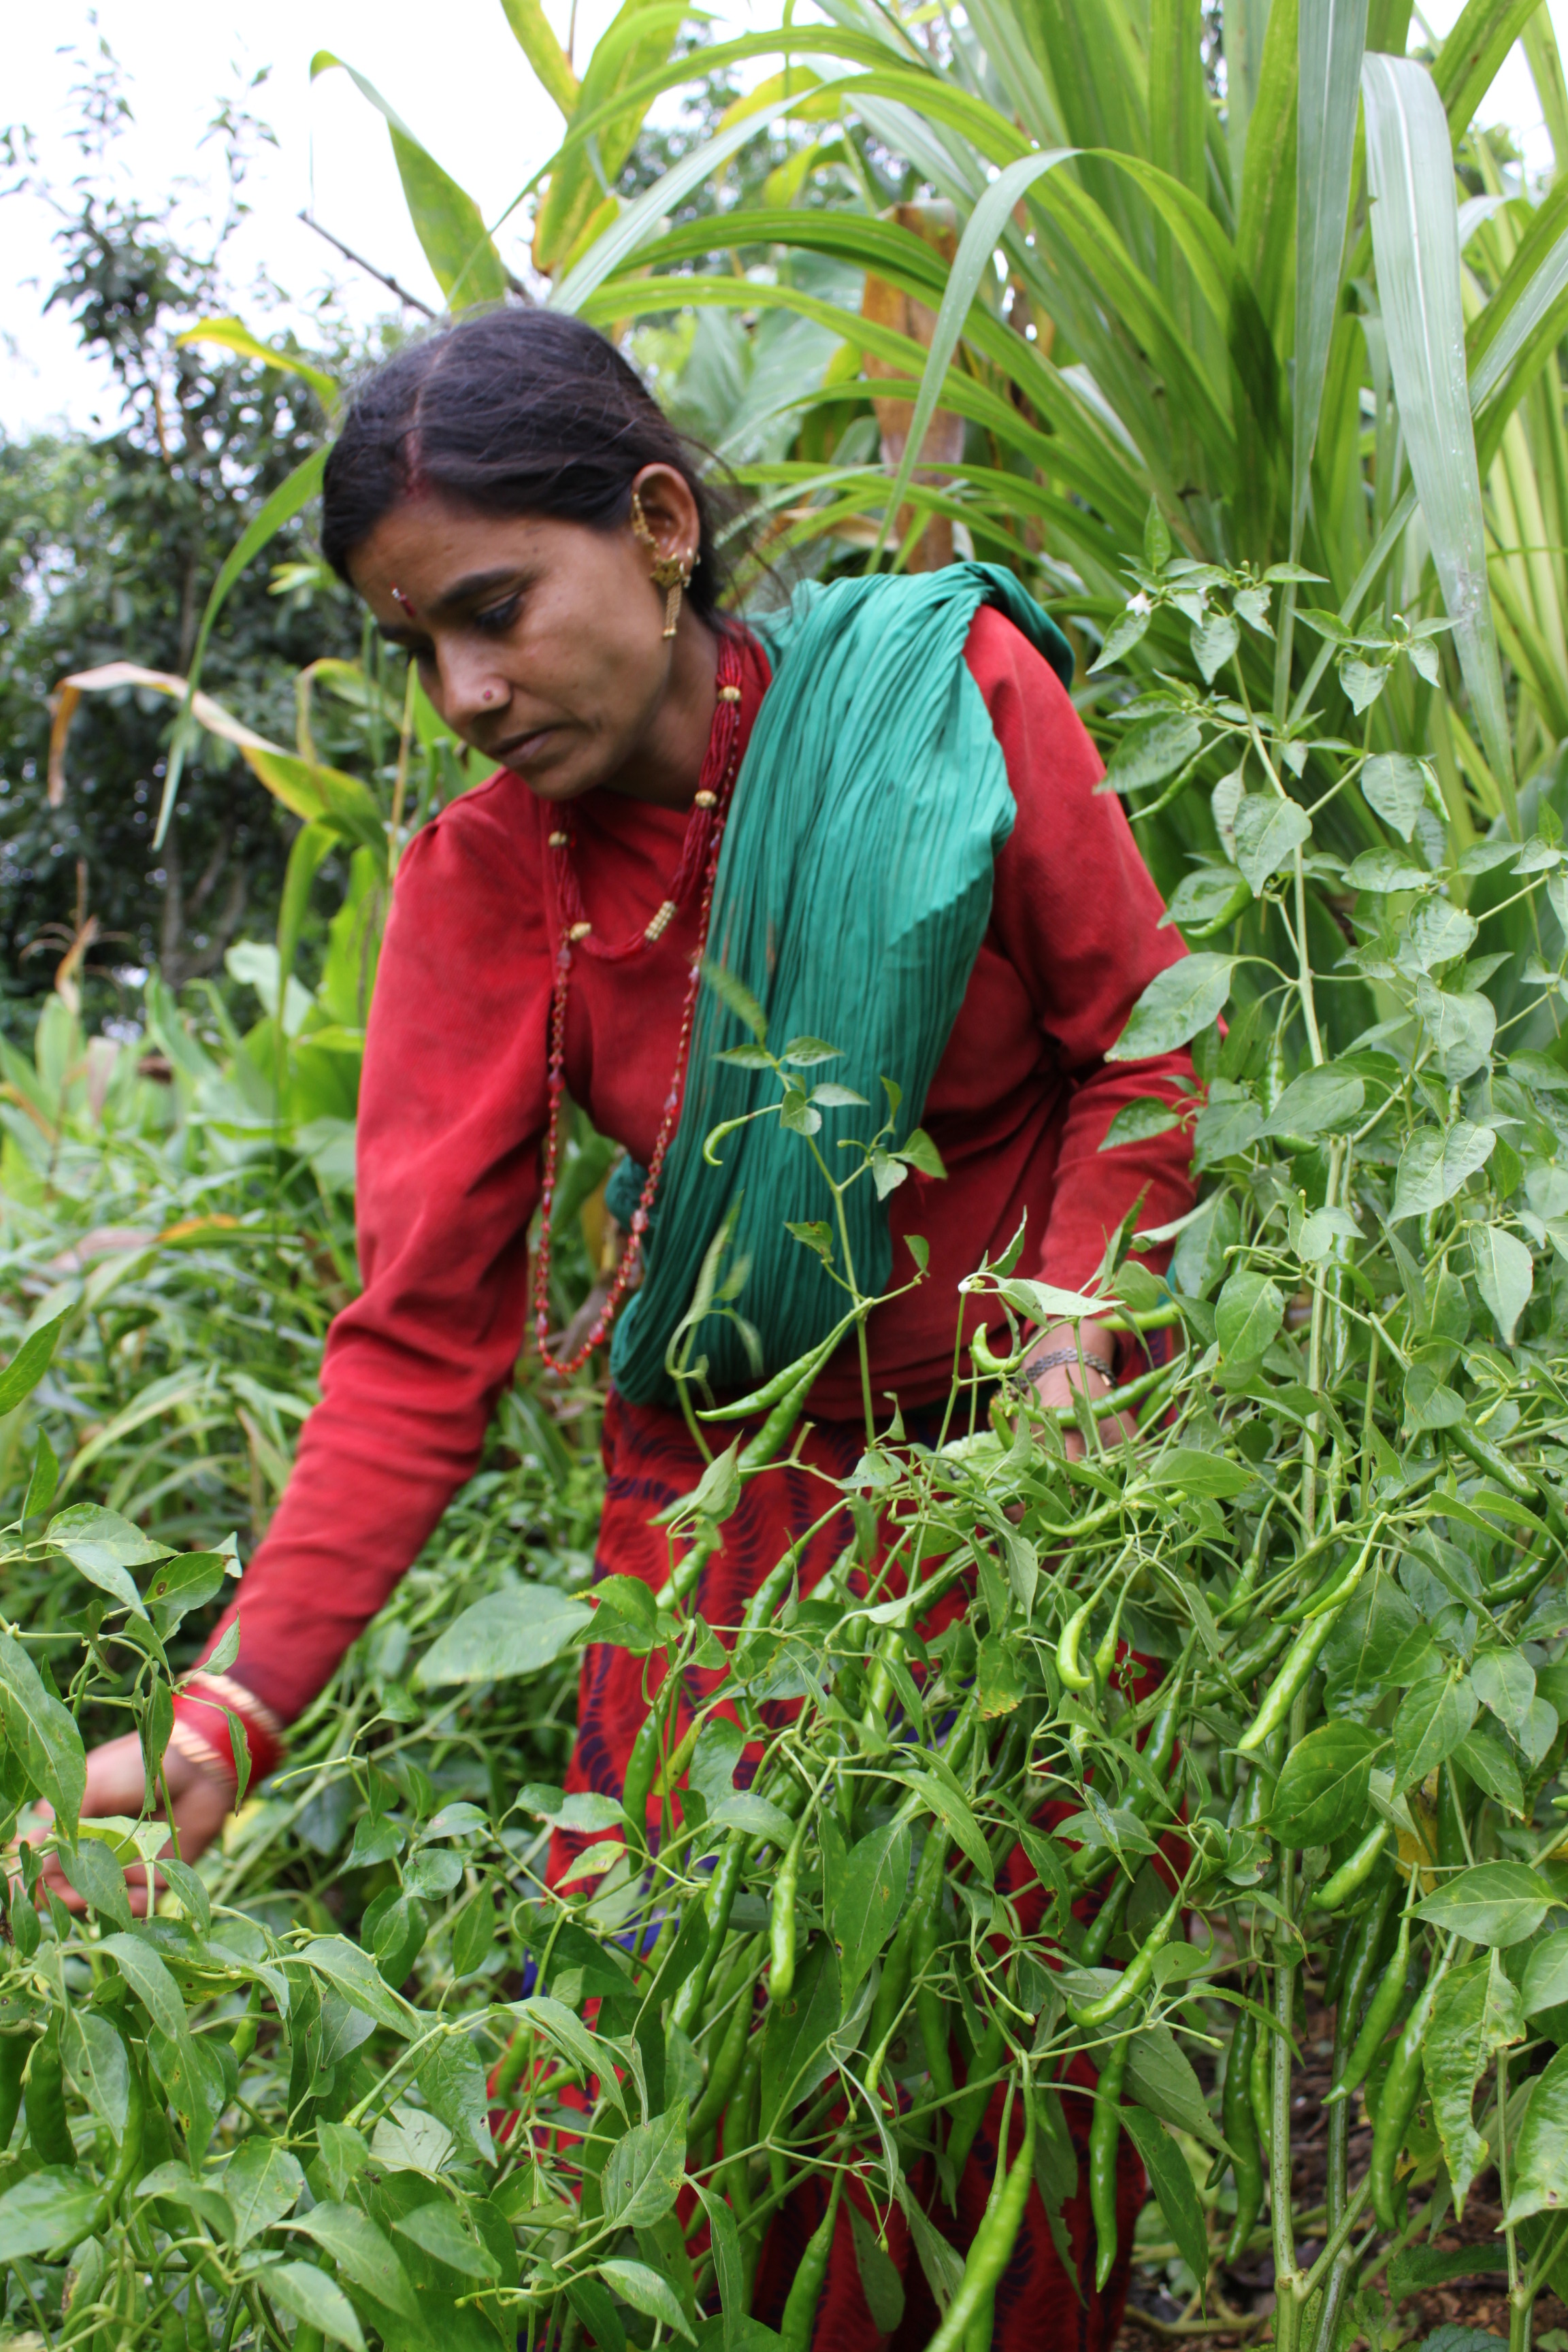 A farmer assisted by the project shows her vegetable garden